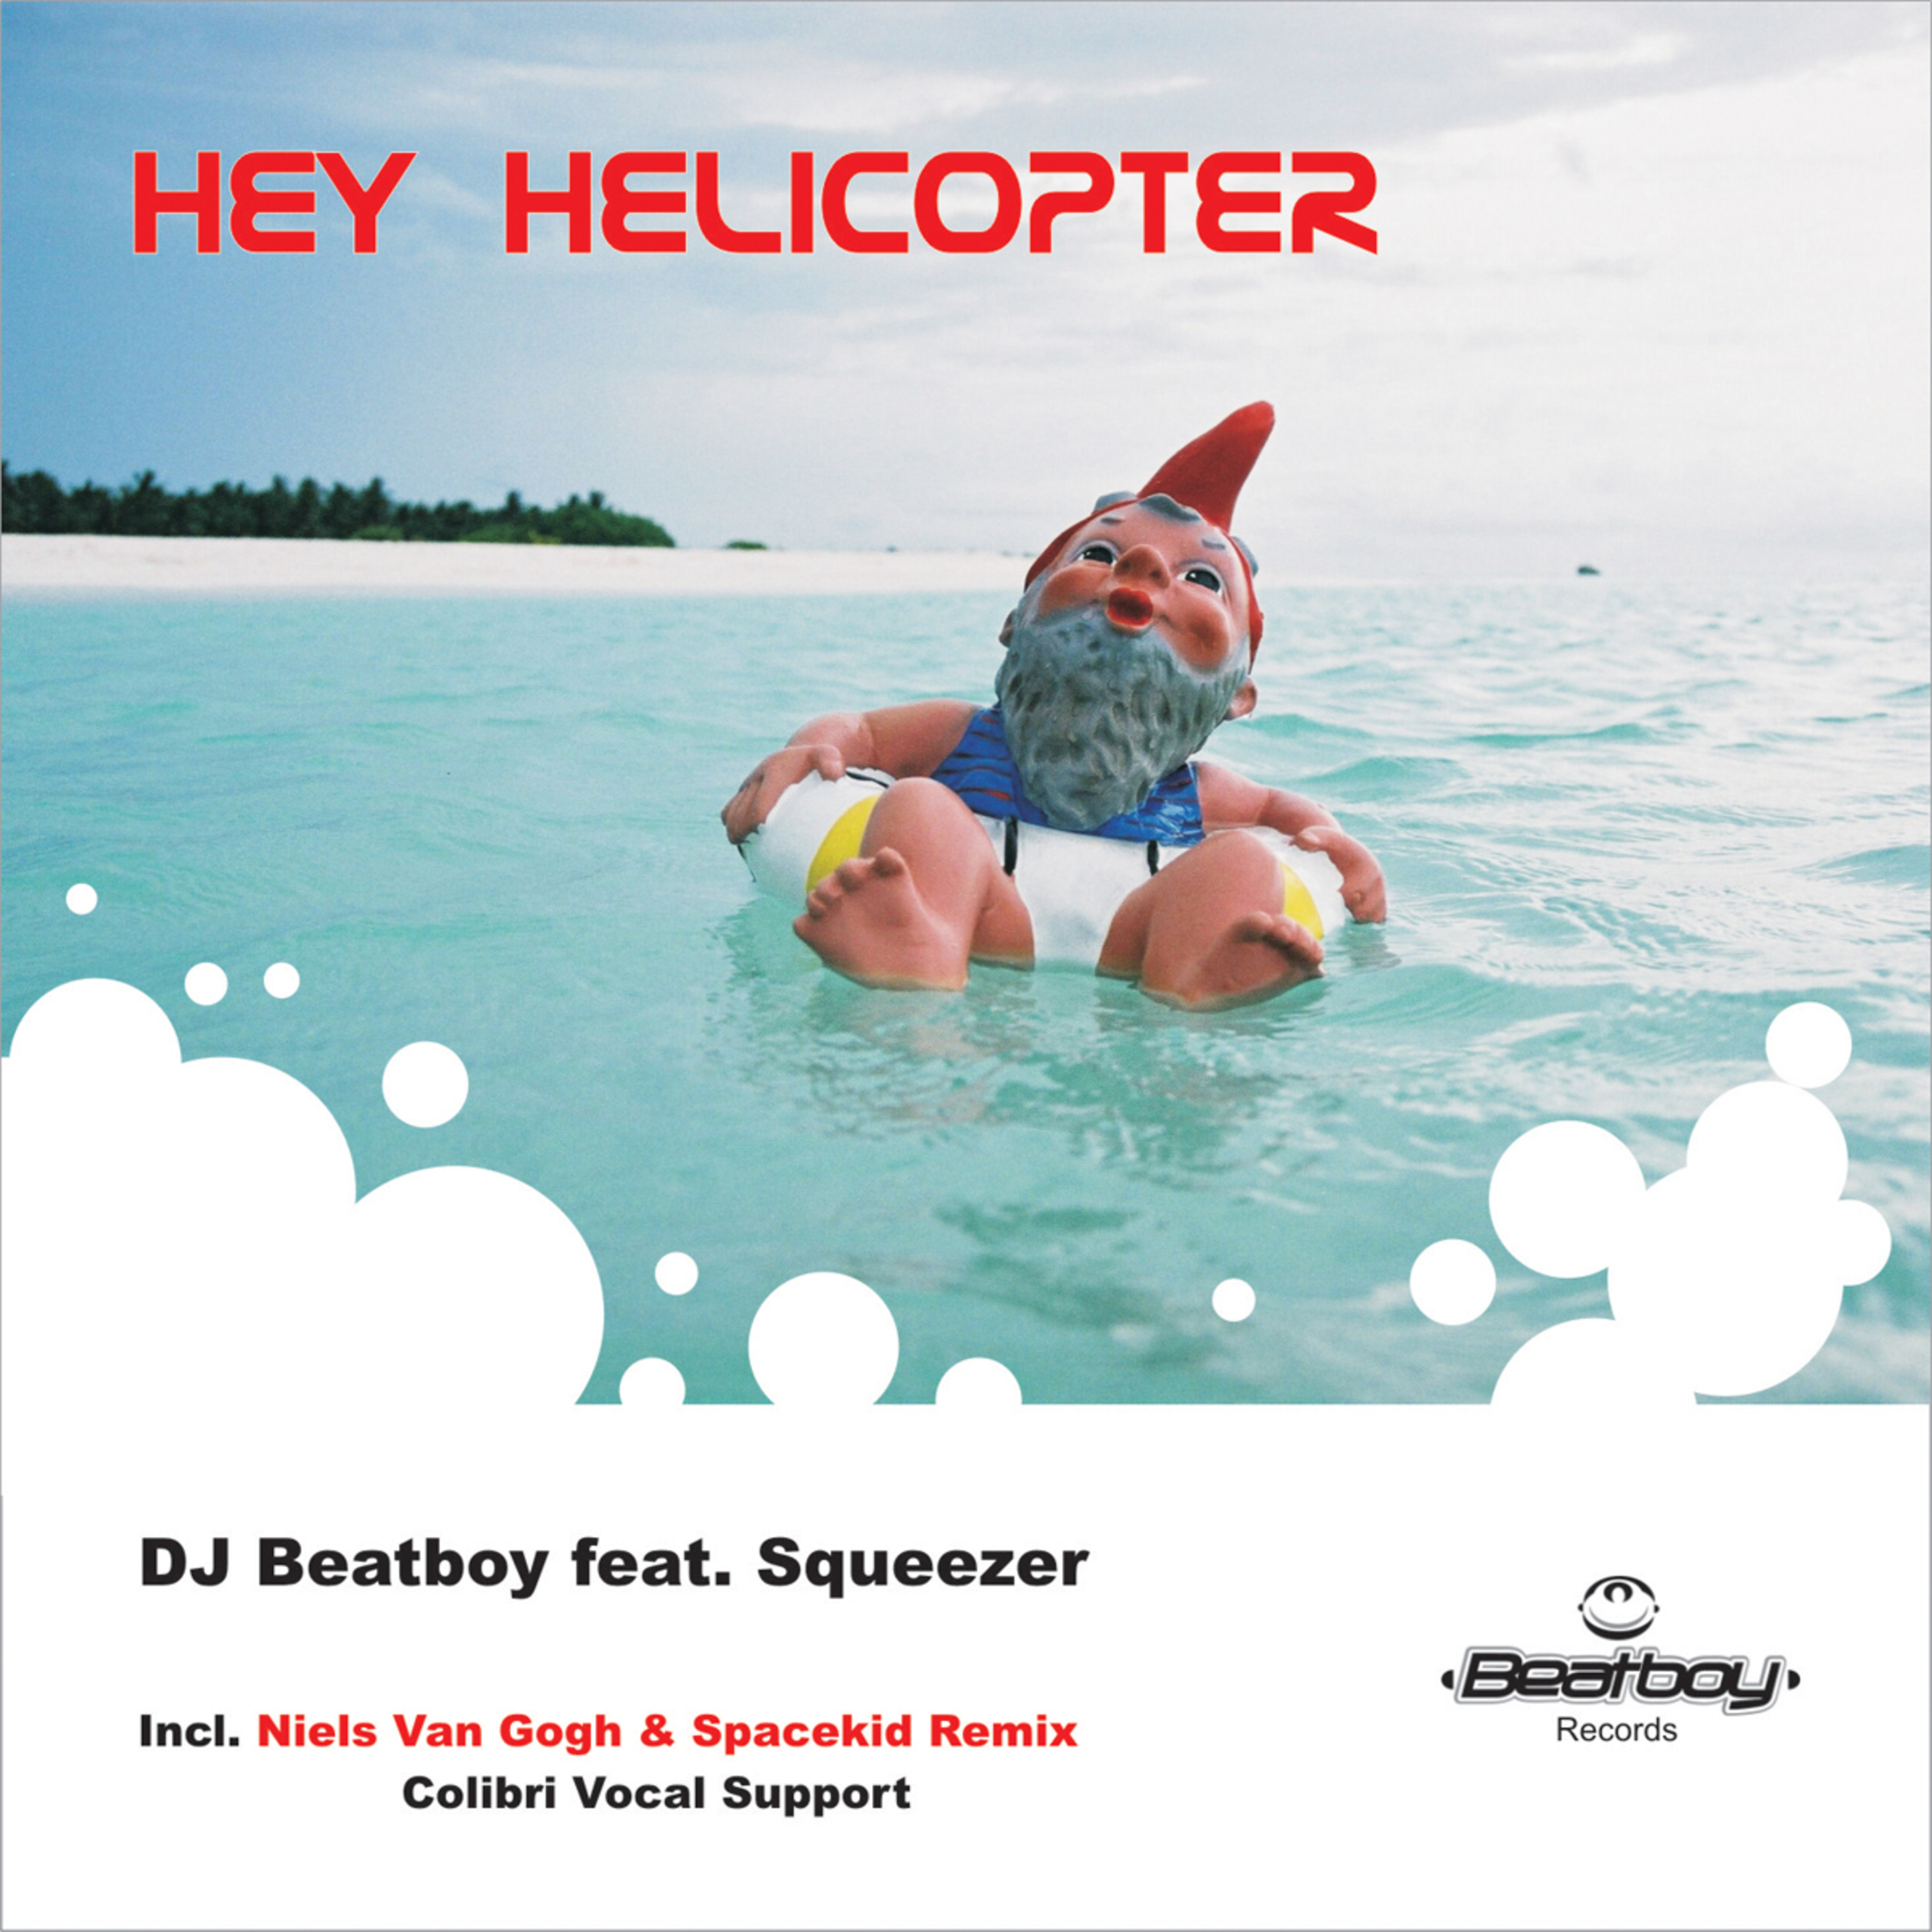 Hey Helicopter (42nd Street Mix)